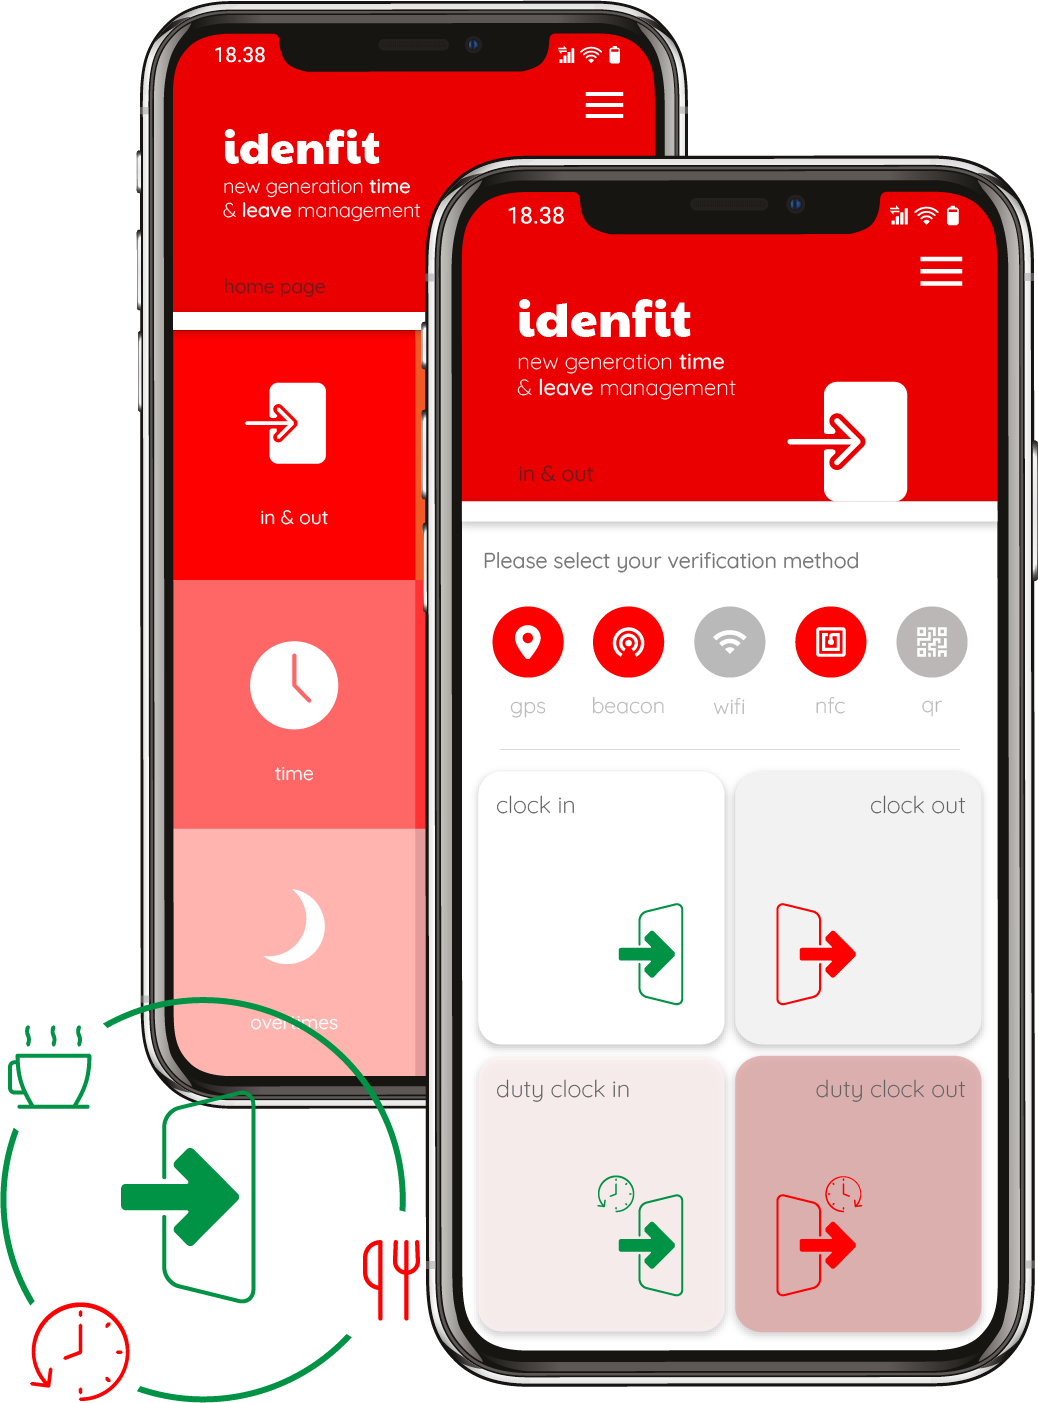 No matter the size of your business, Idenfit allows you to plan your employees' work schedules easily